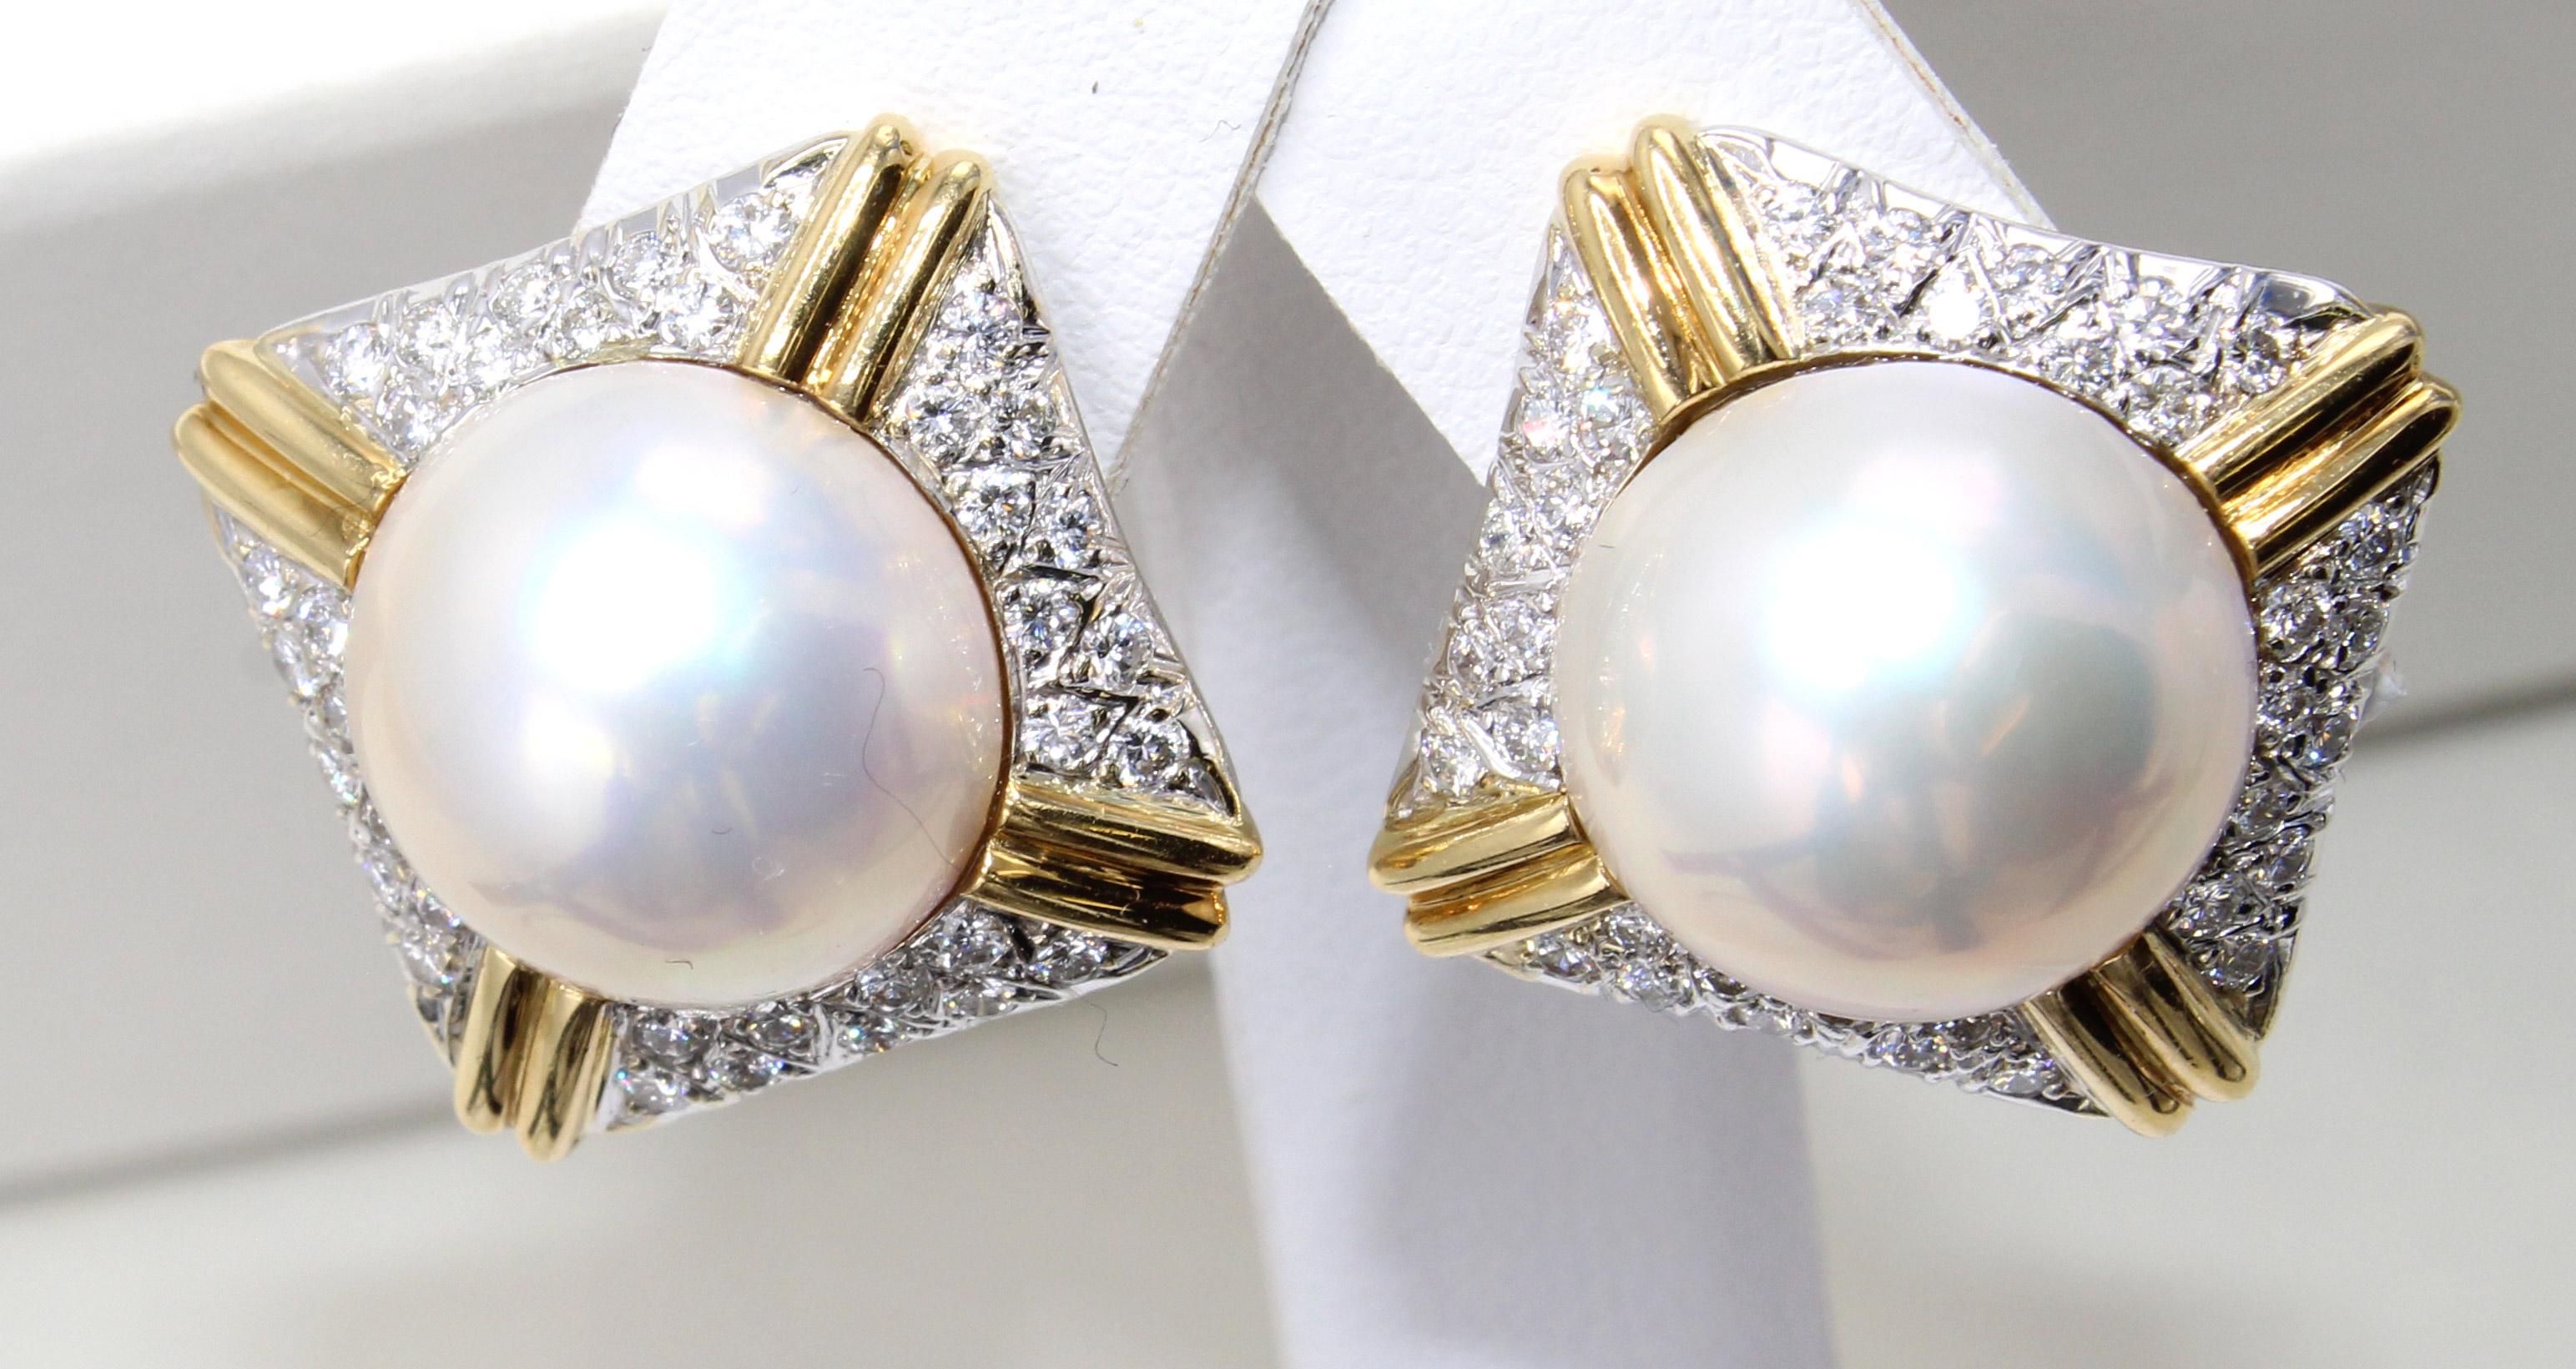 2 perfectly matched white lustrous 13 millimeter mabe pearls are the center piece of these well hand-made 18 karat gold diamond earrings. 36 bright white lively round brilliant cut diamonds set in each earring create a wonderful sparkle on the ear.